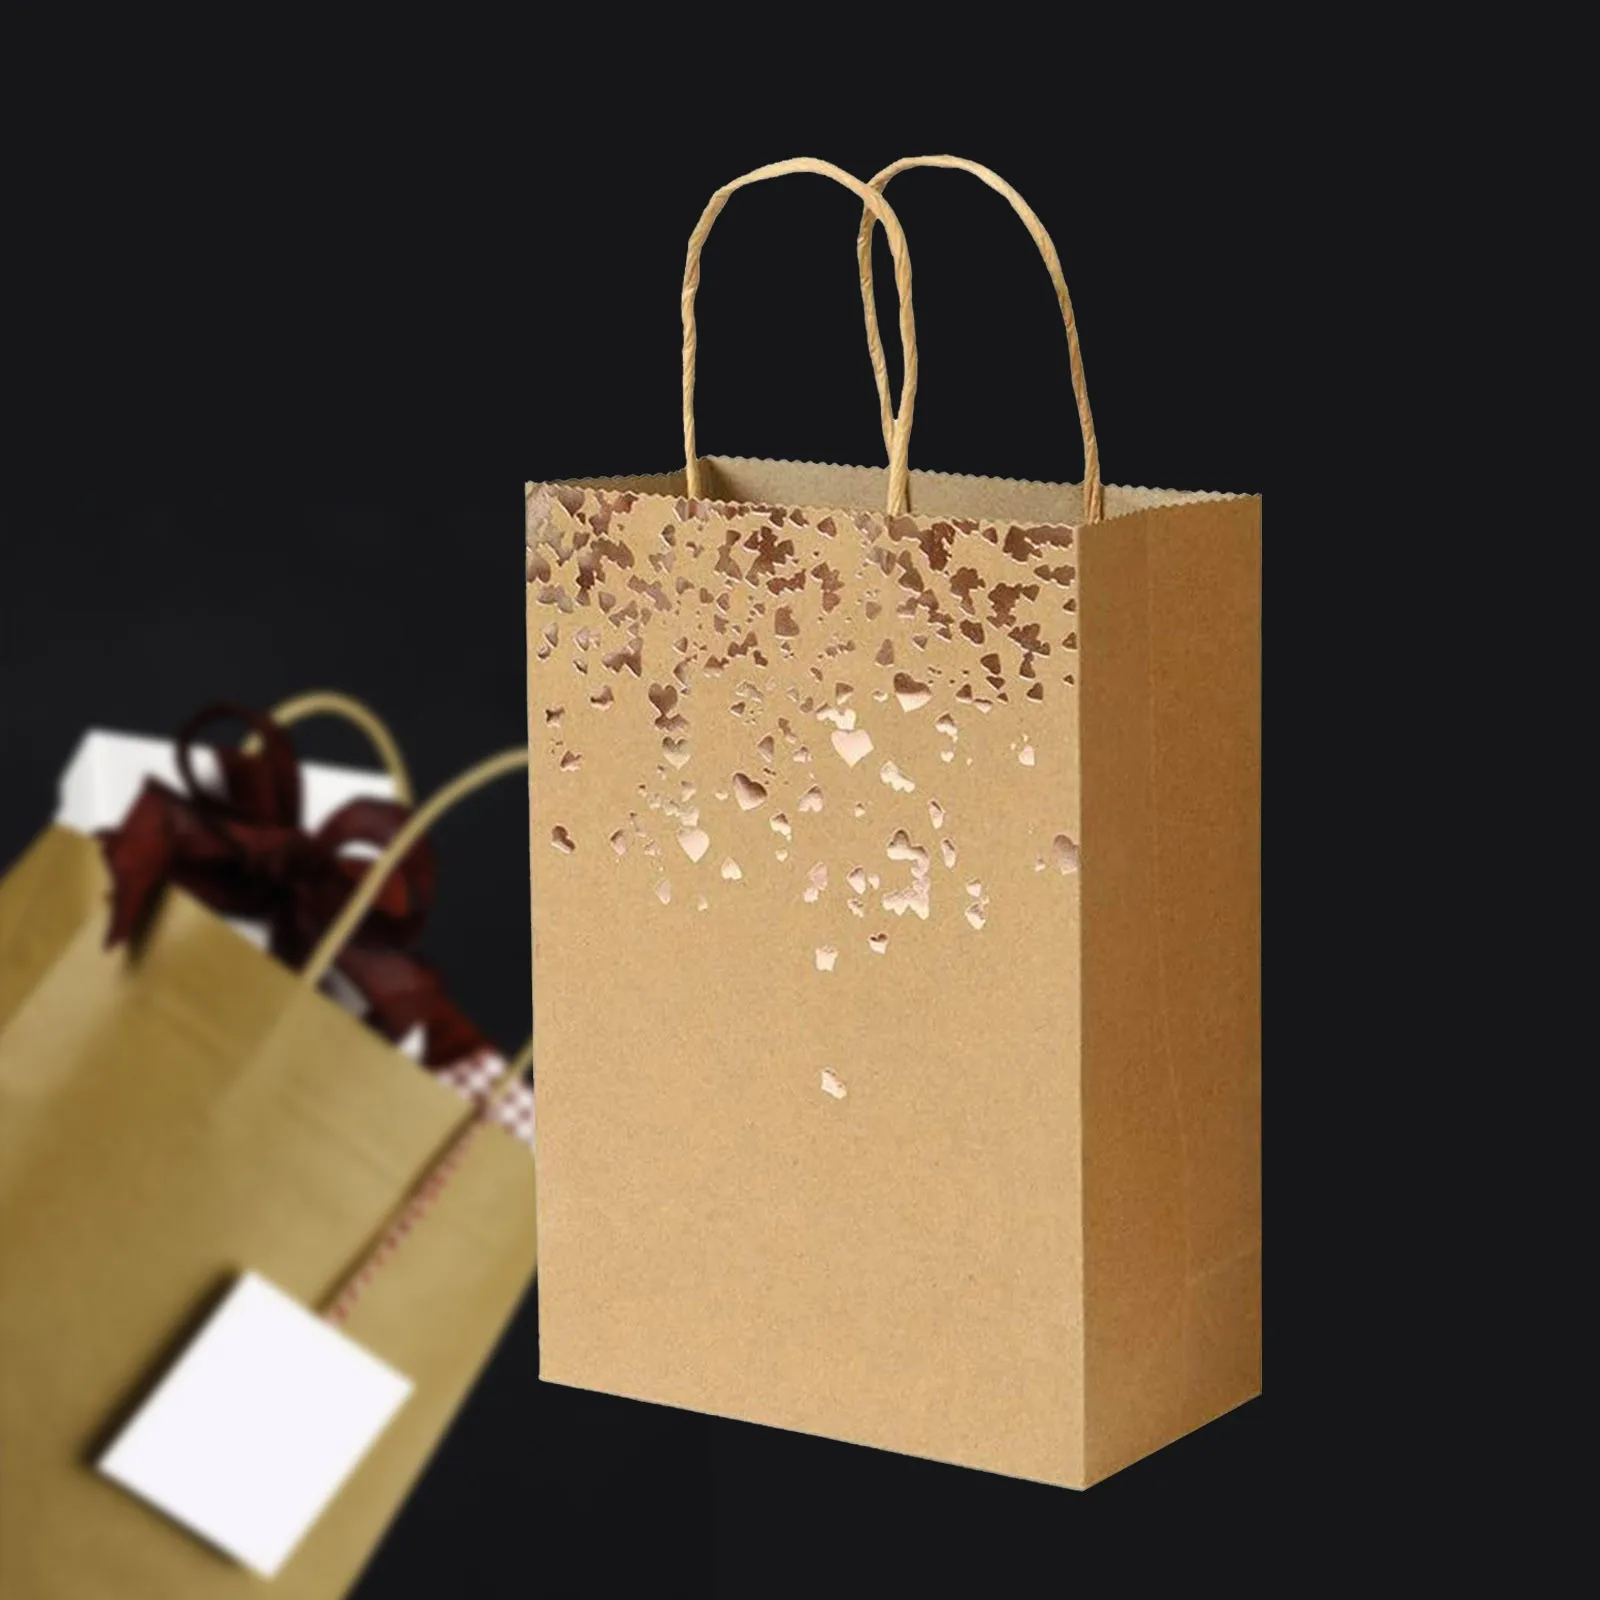 

20pc Cowhide Gift Bag Gift Bags Kraft Paper Bags Birthday Wedding Christmas And Festive Celebrations Decorative Gift Bag c50